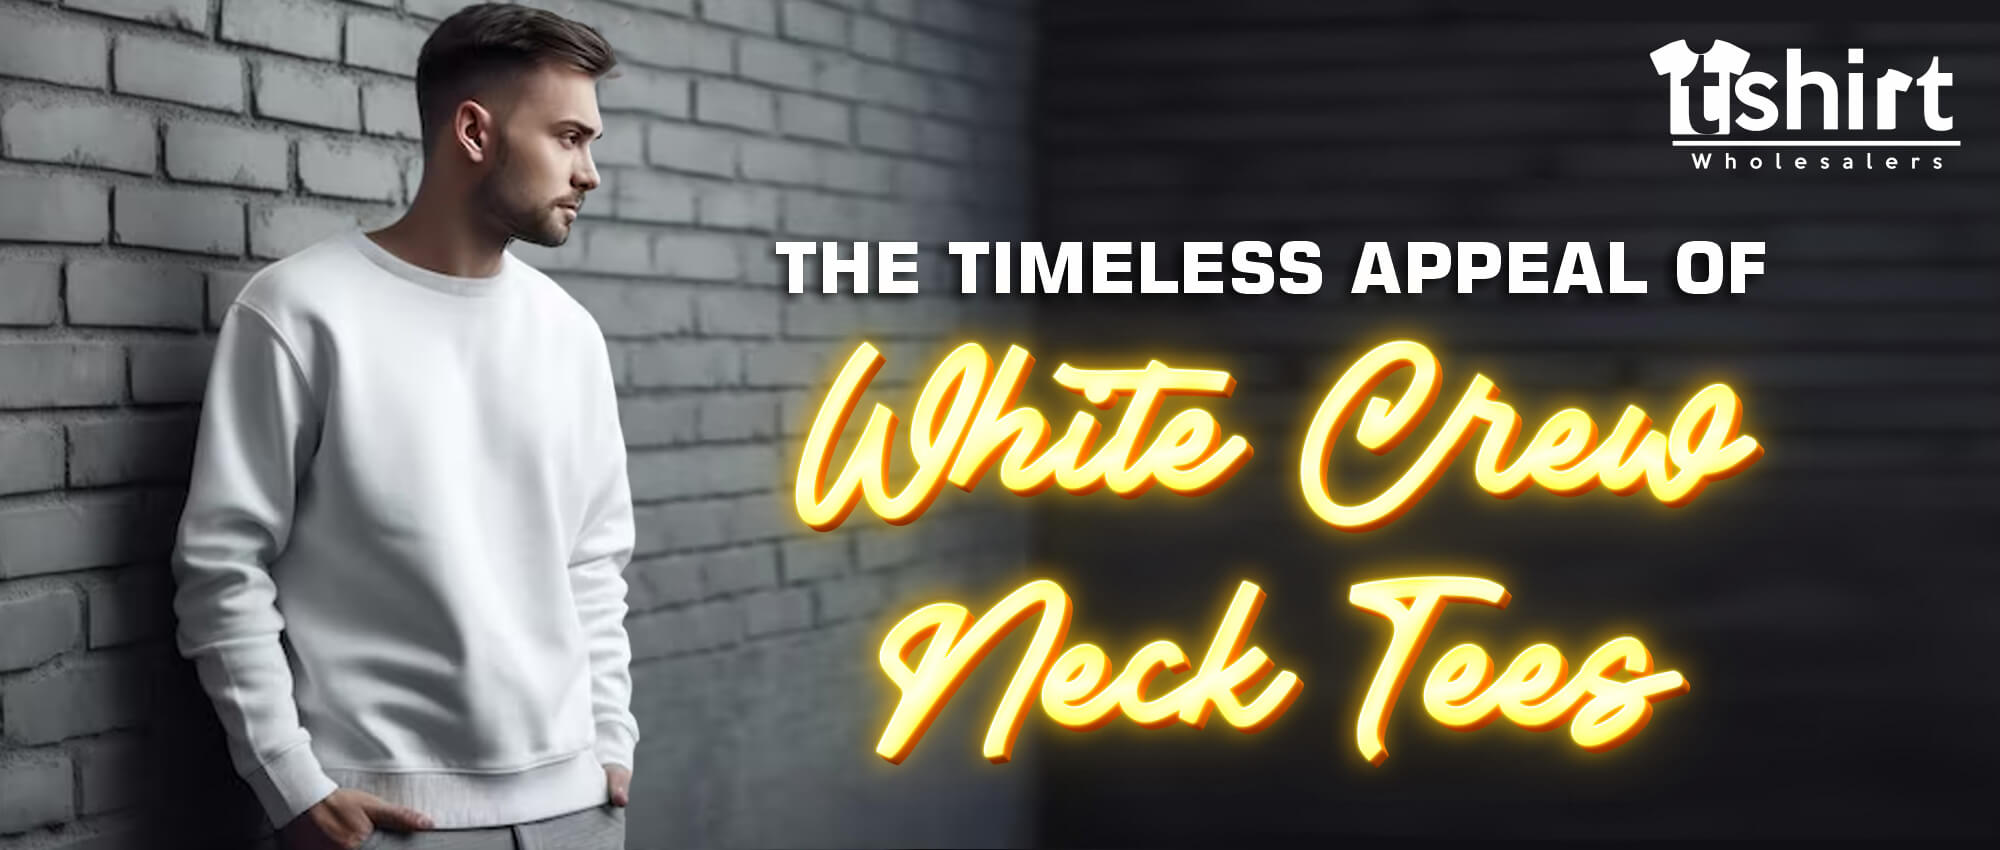 THE TIMELESS APPEAL OF WHITE CREW NECK TEES